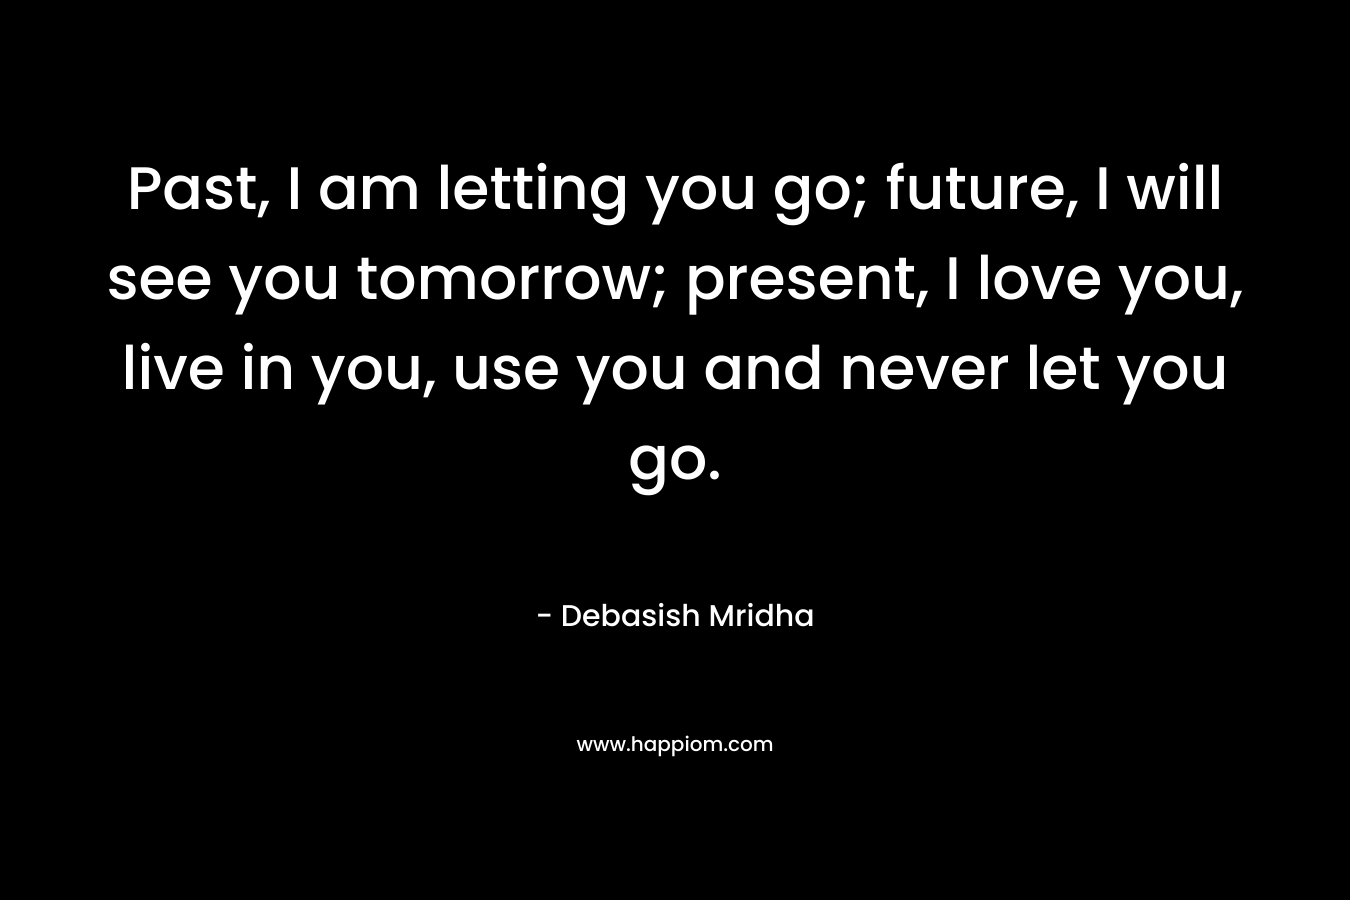 Past, I am letting you go; future, I will see you tomorrow; present, I love you, live in you, use you and never let you go.